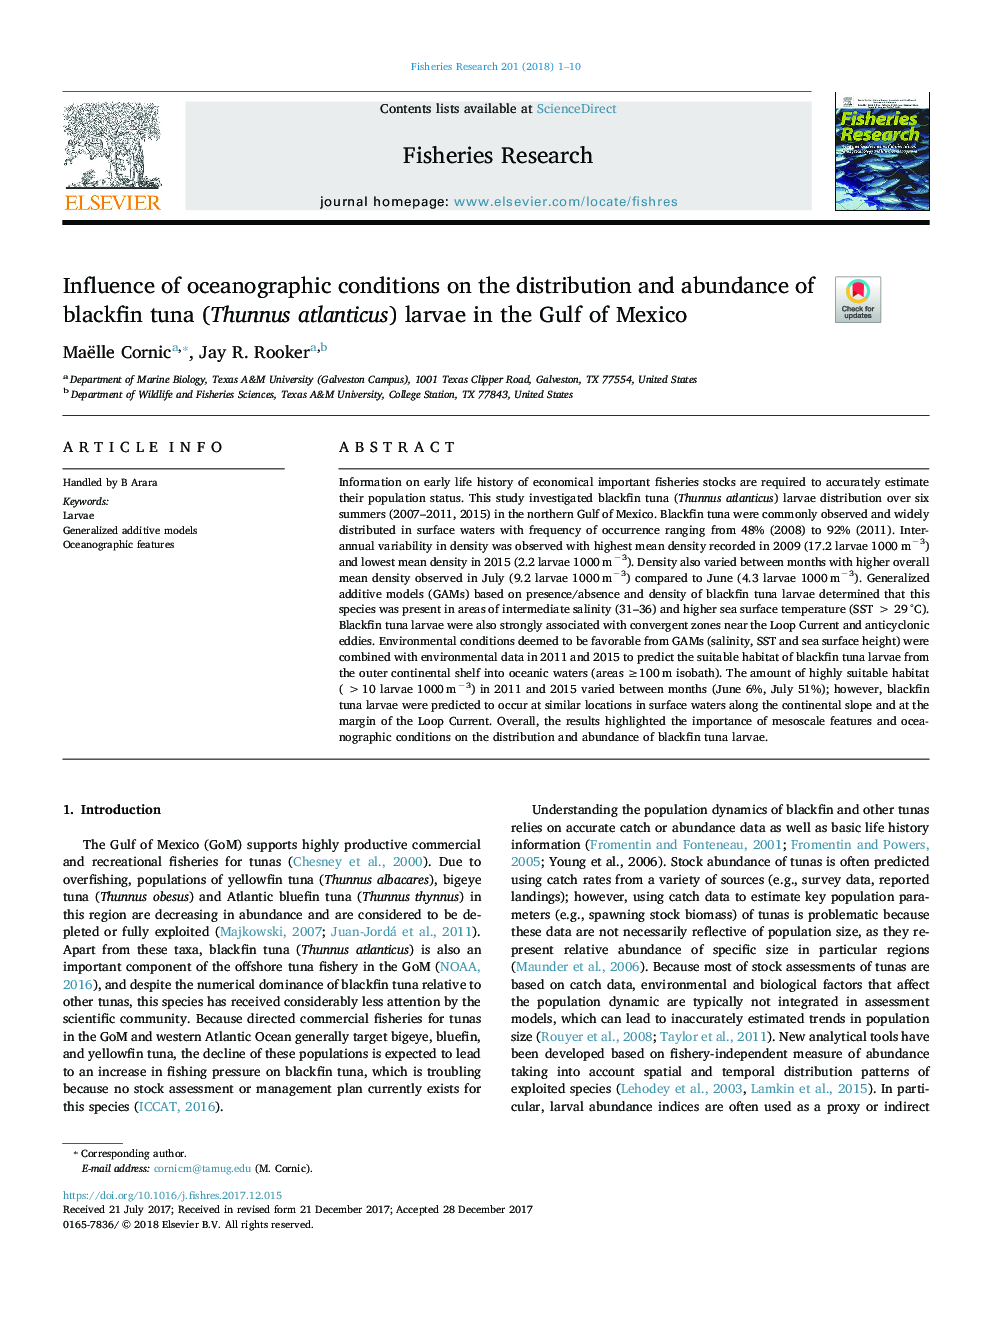 Influence of oceanographic conditions on the distribution and abundance of blackfin tuna (Thunnus atlanticus) larvae in the Gulf of Mexico